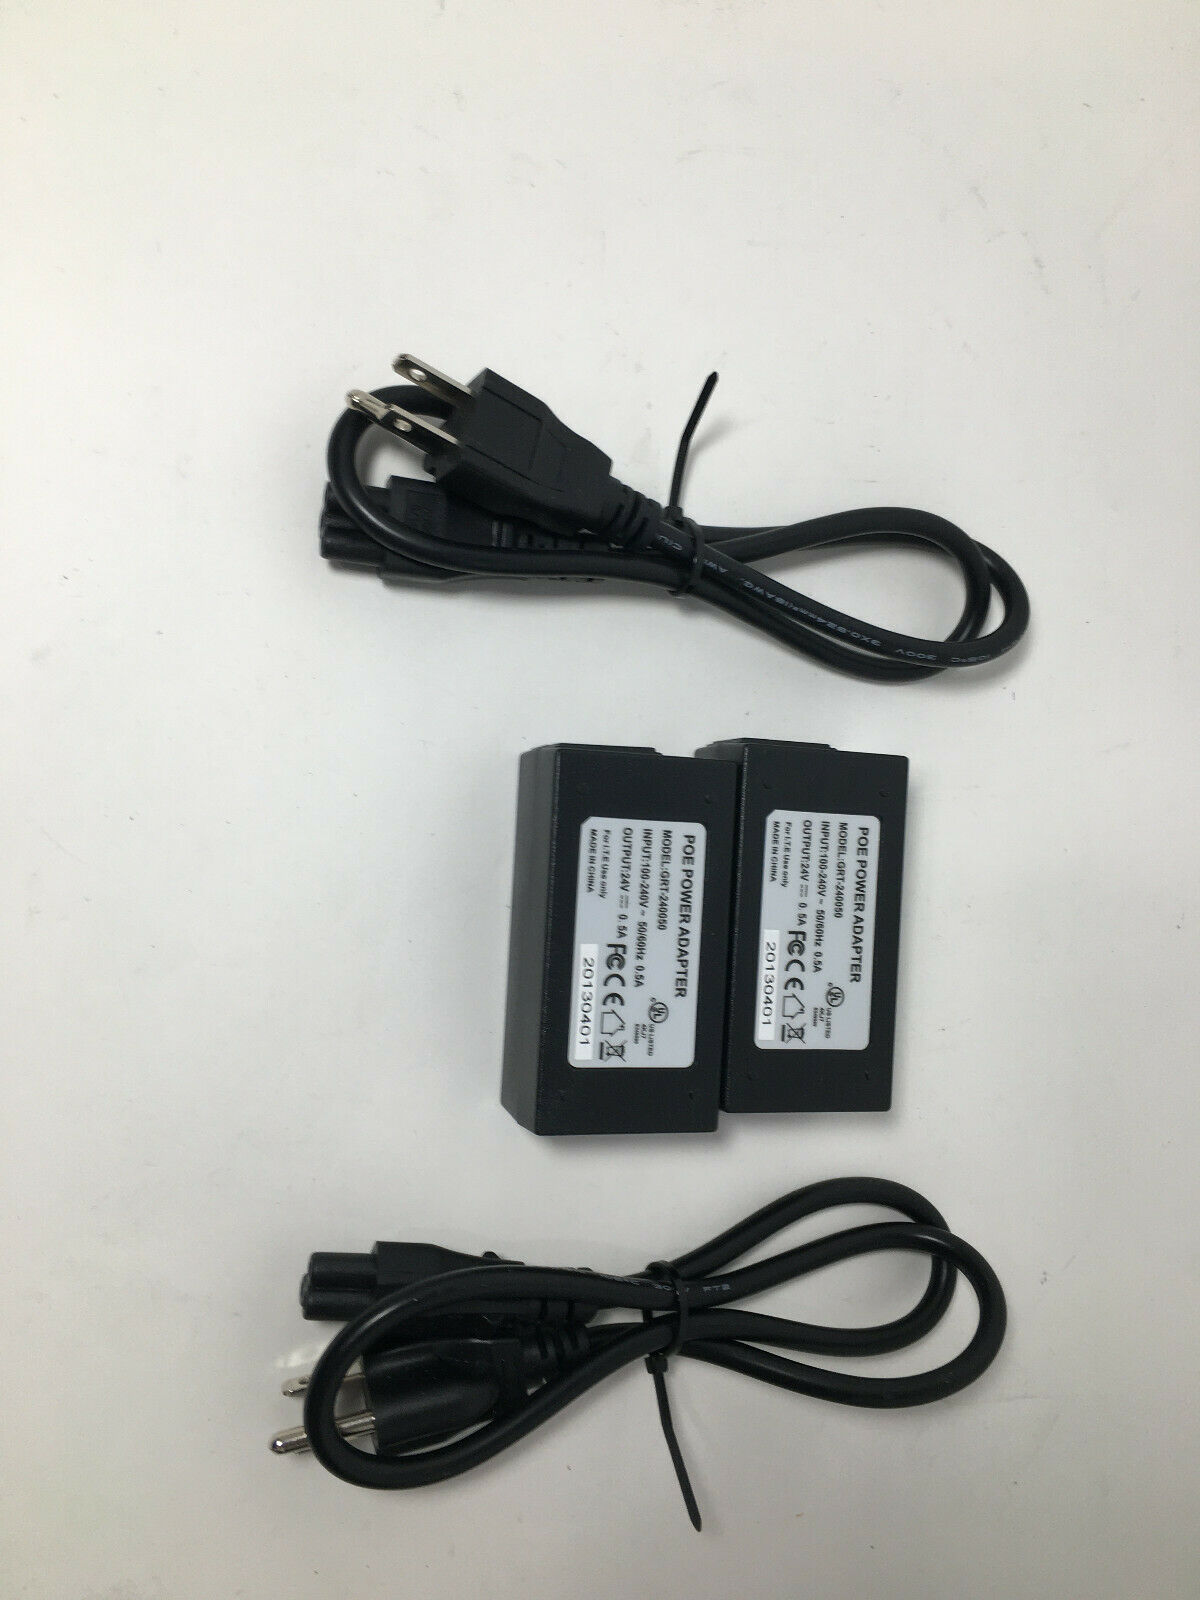 Primary image for Lot of 2 New Hikvision POE Camera Power Supply Adapter GRT-240050 24V 500MA 